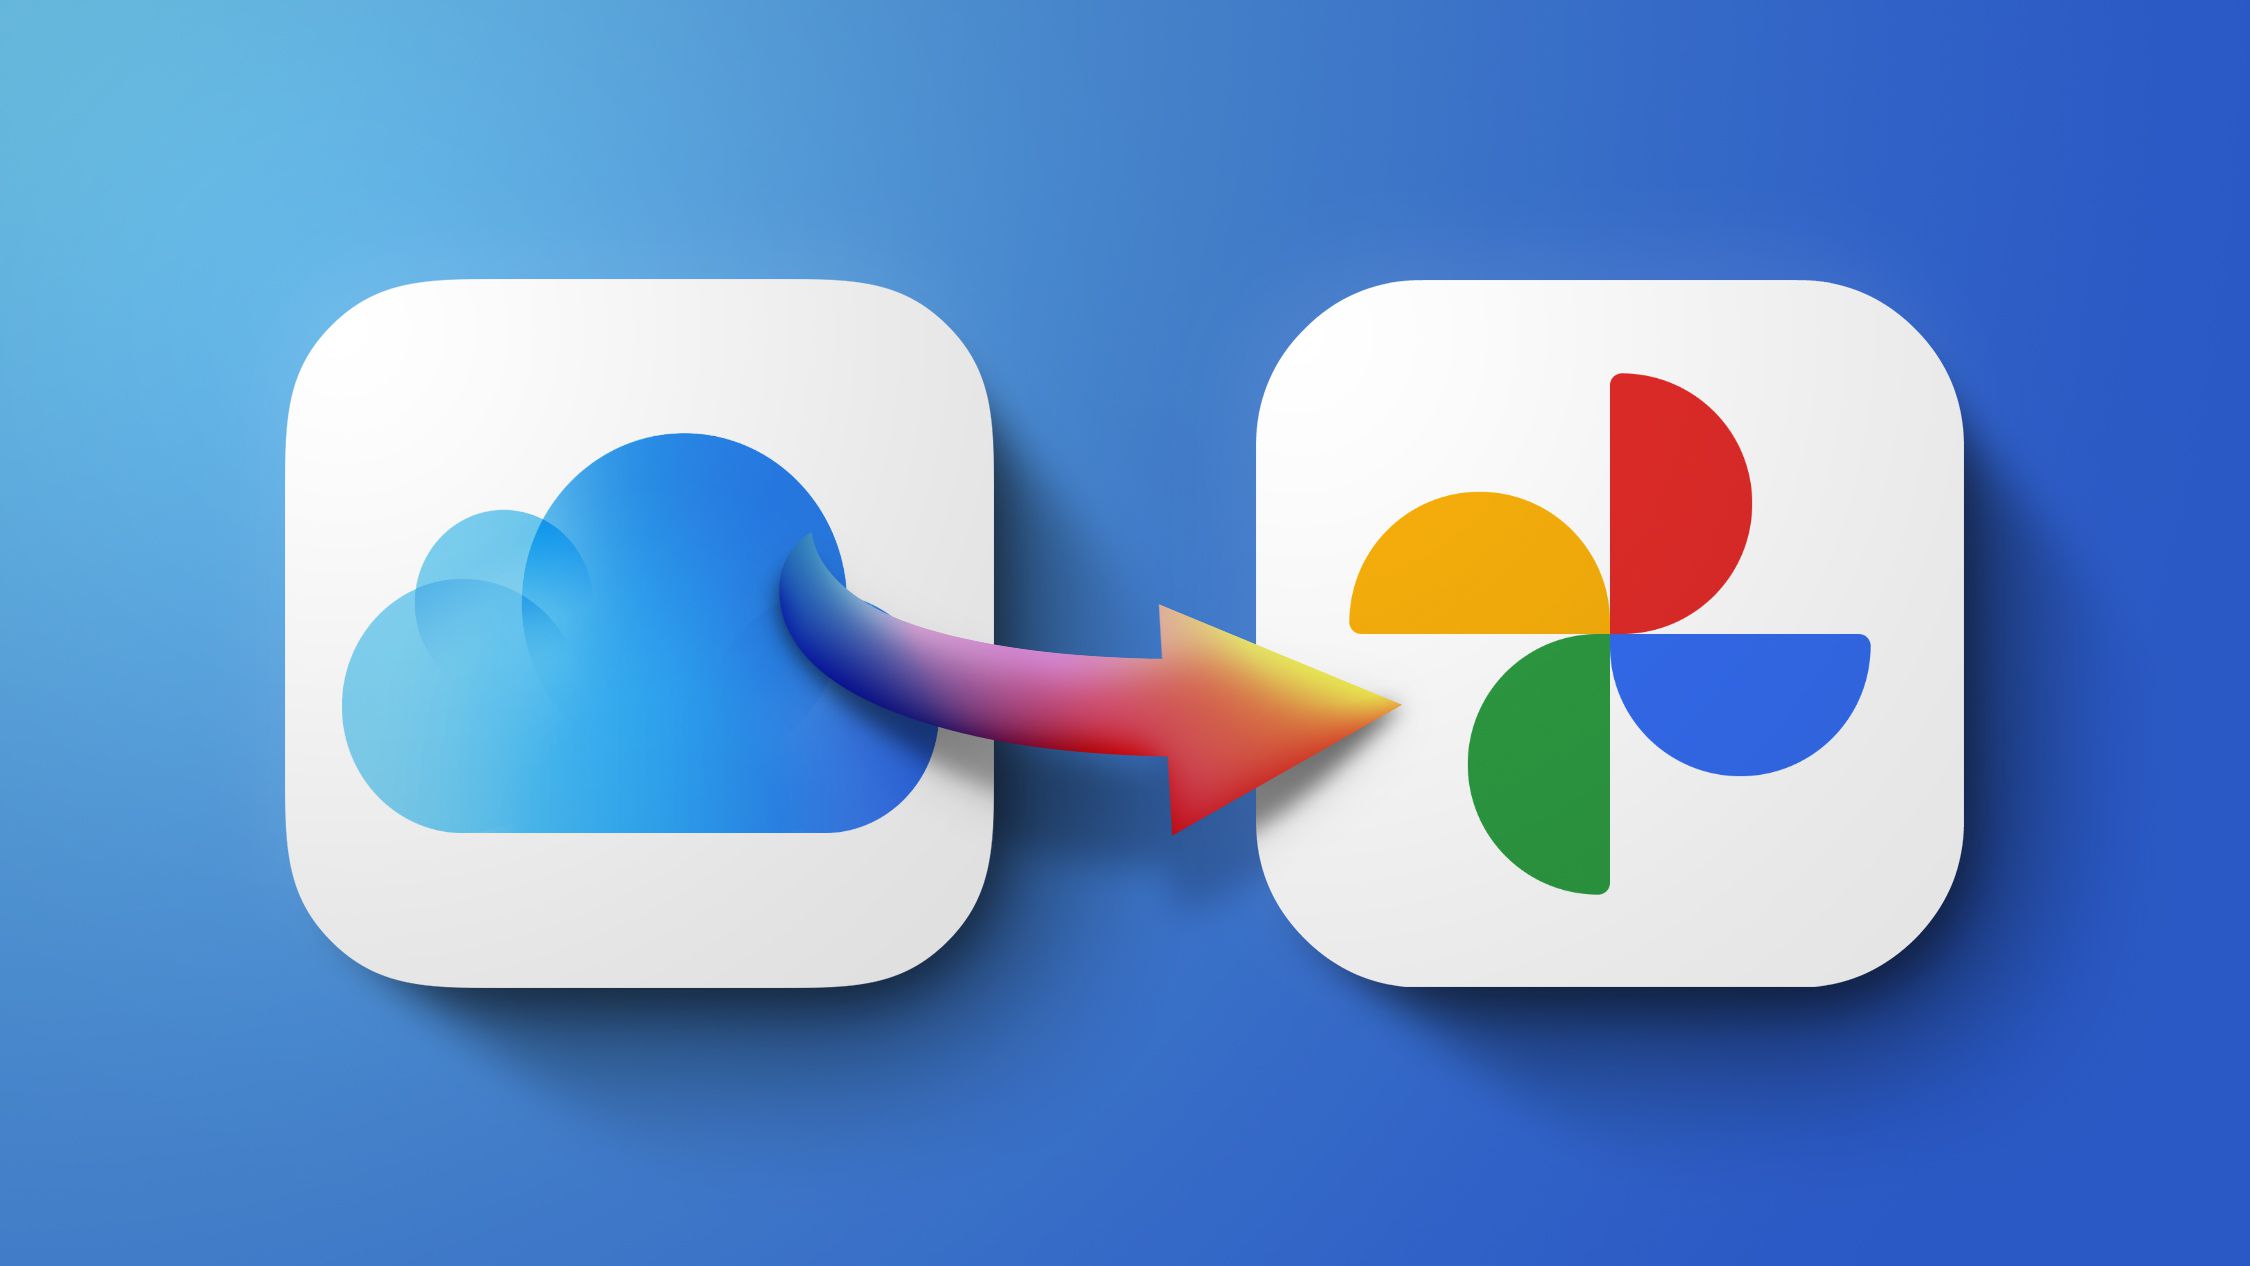 Apple launches service to transfer iCloud photos and videos to Google Photos